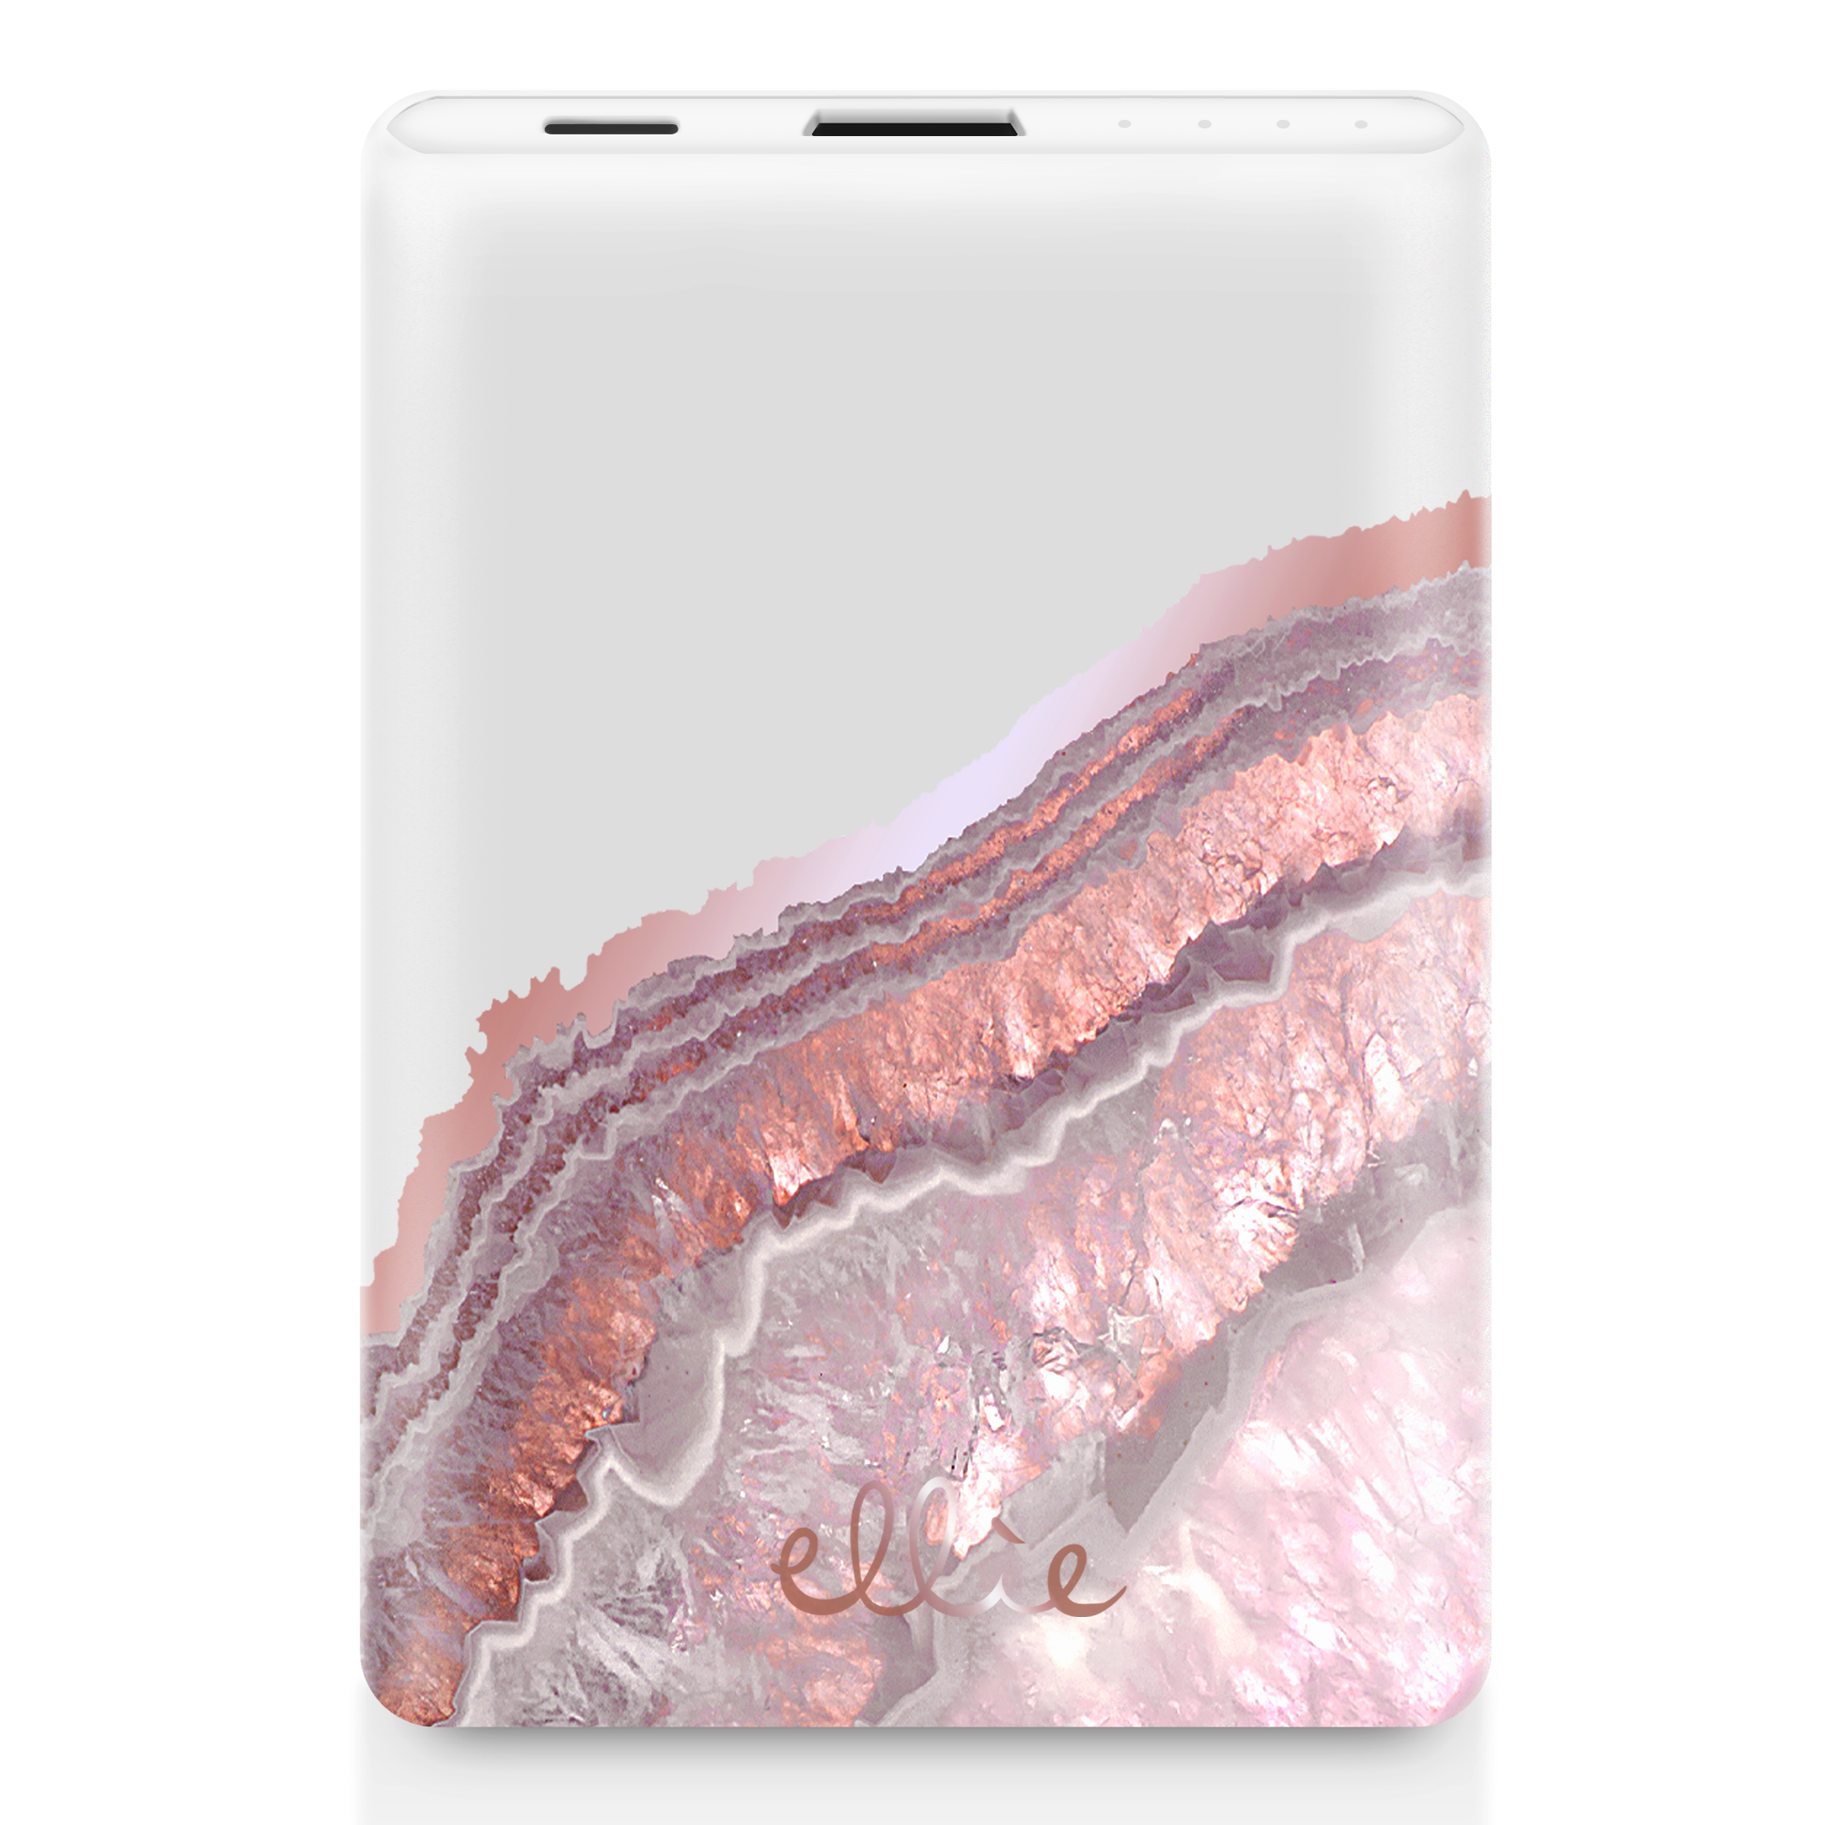 K123 Power Bank Charger - Rose Gold Agate